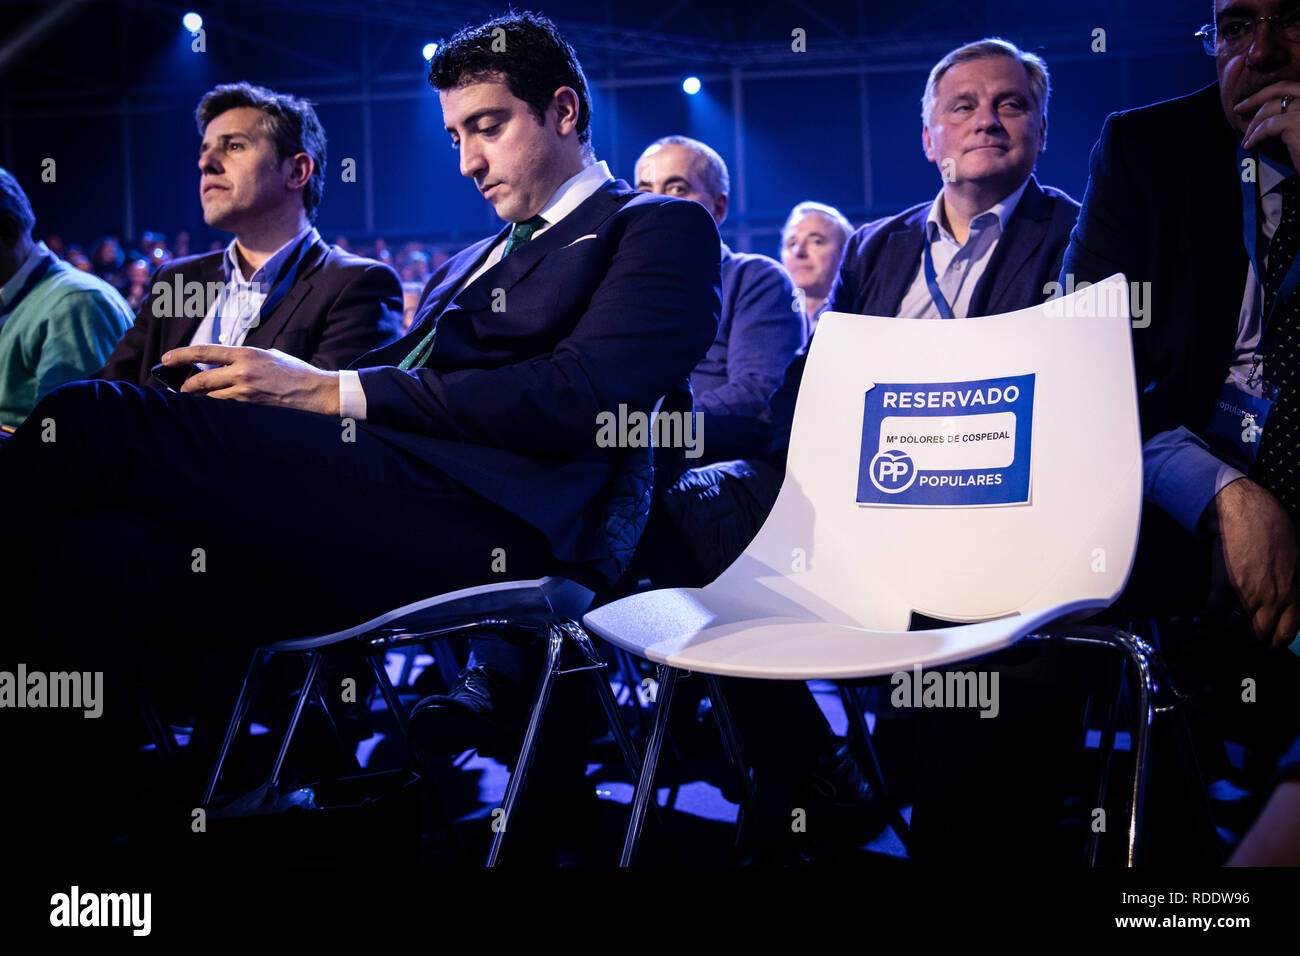 January 18, 2019 - Madrid, Spain - The absence of Maria Dolores Cospedal at the event.. The empty chair of The PP celebrates its national convention to establish the main lines of its electoral program for the three elections scheduled for May 26 and are key to gauge the leadership of the popular president, Pablo Casado. (Credit Image: © Jesus Hellin/ZUMA Wire) Stock Photo